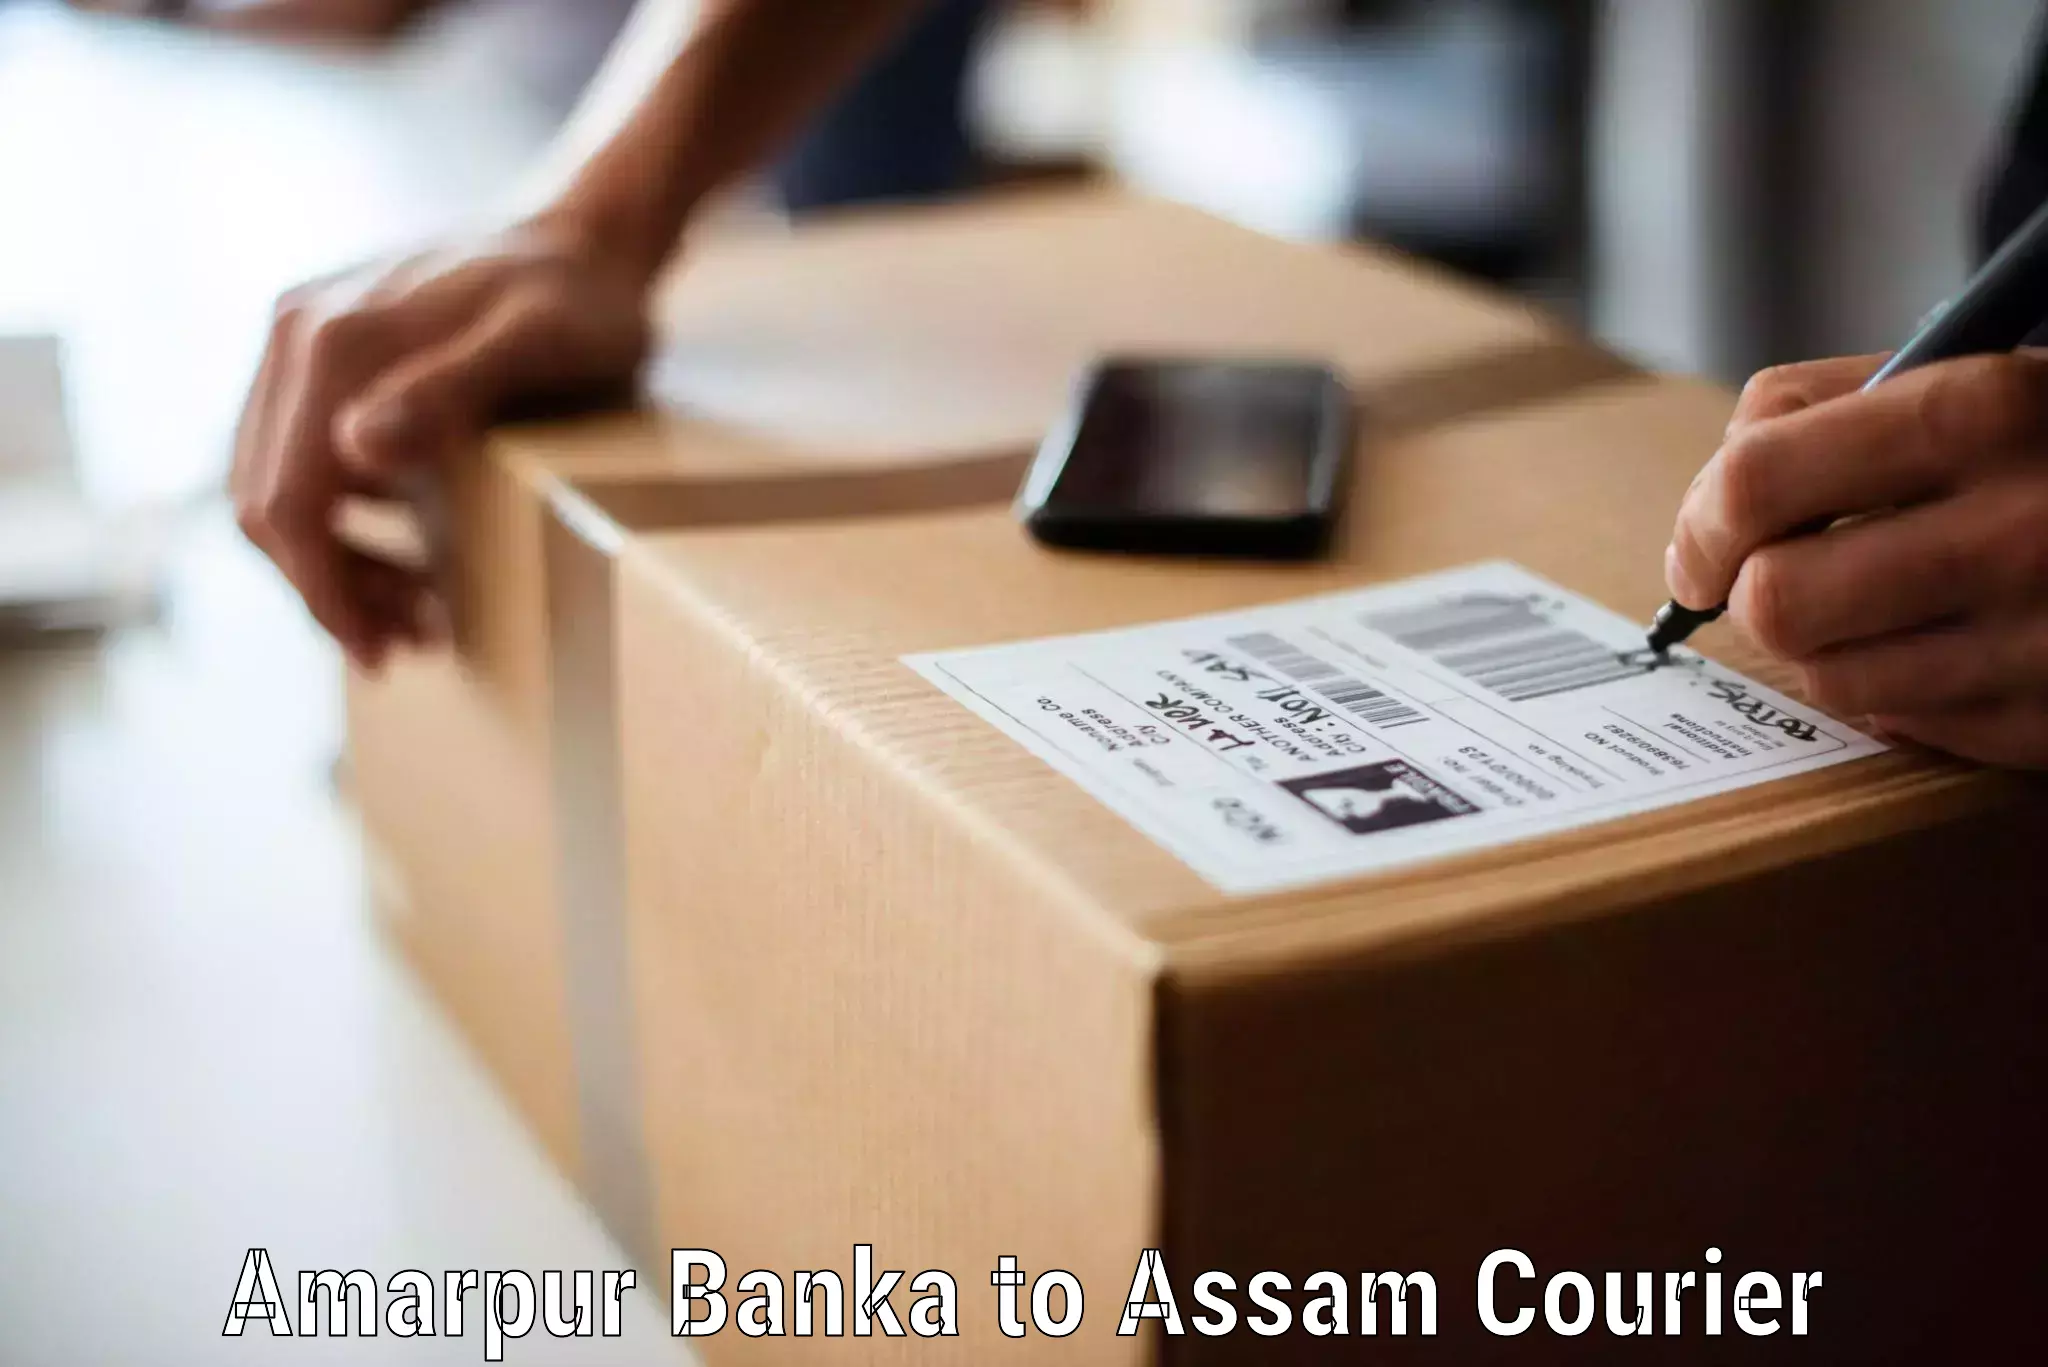 Trusted relocation services Amarpur Banka to Assam